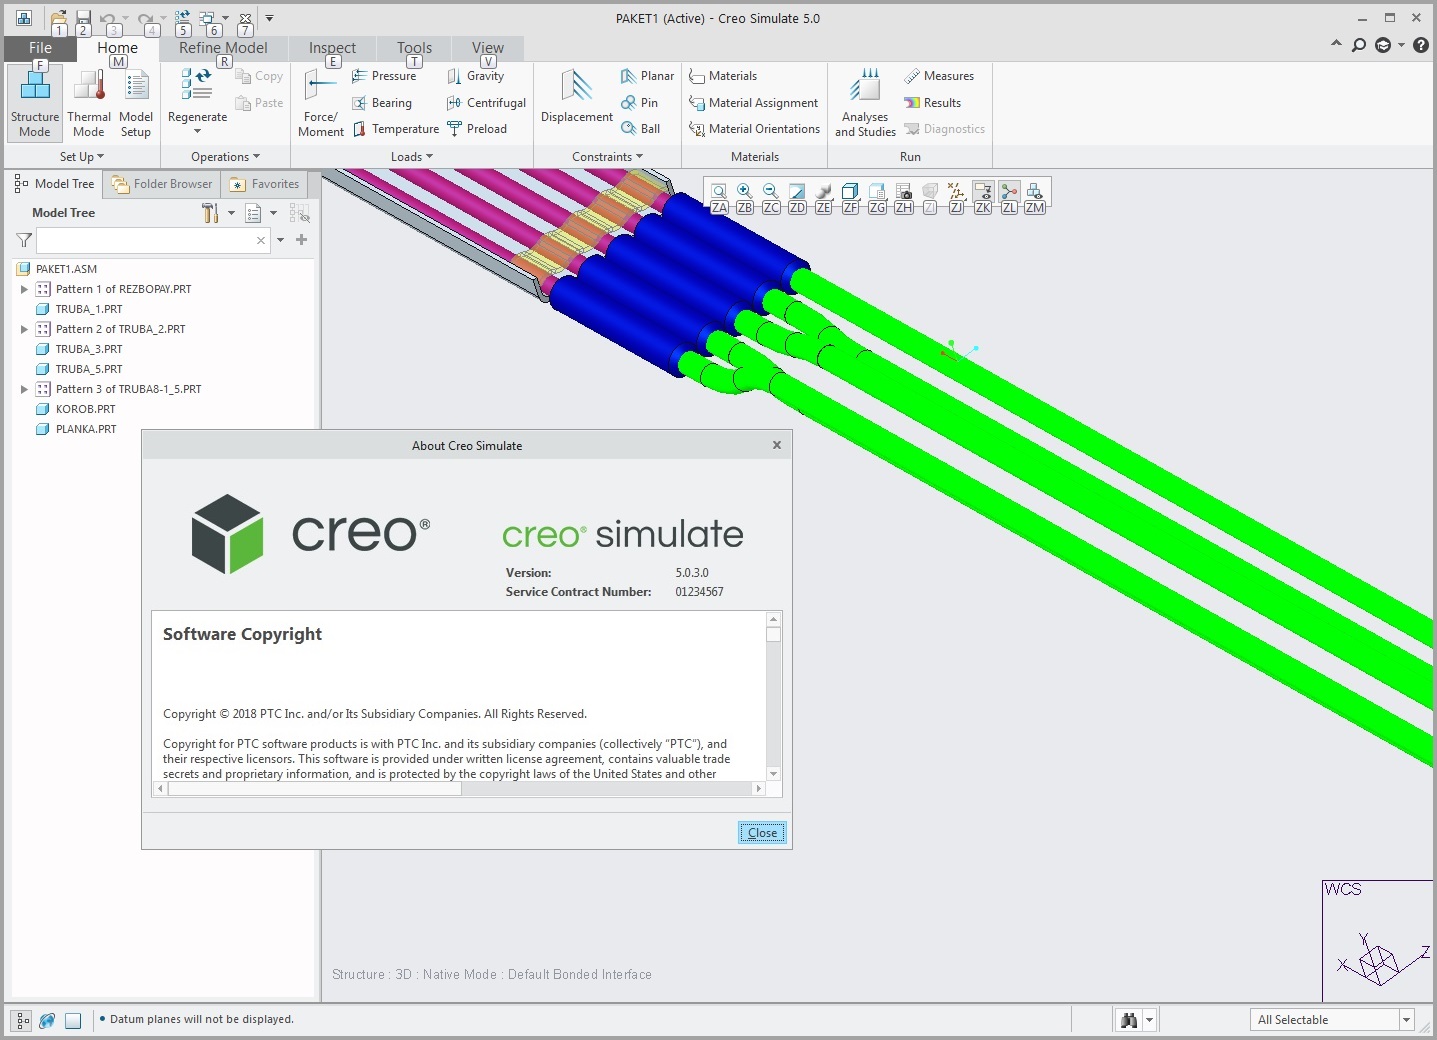 Working with PTC Creo 5.0.3.0 Simulate full license